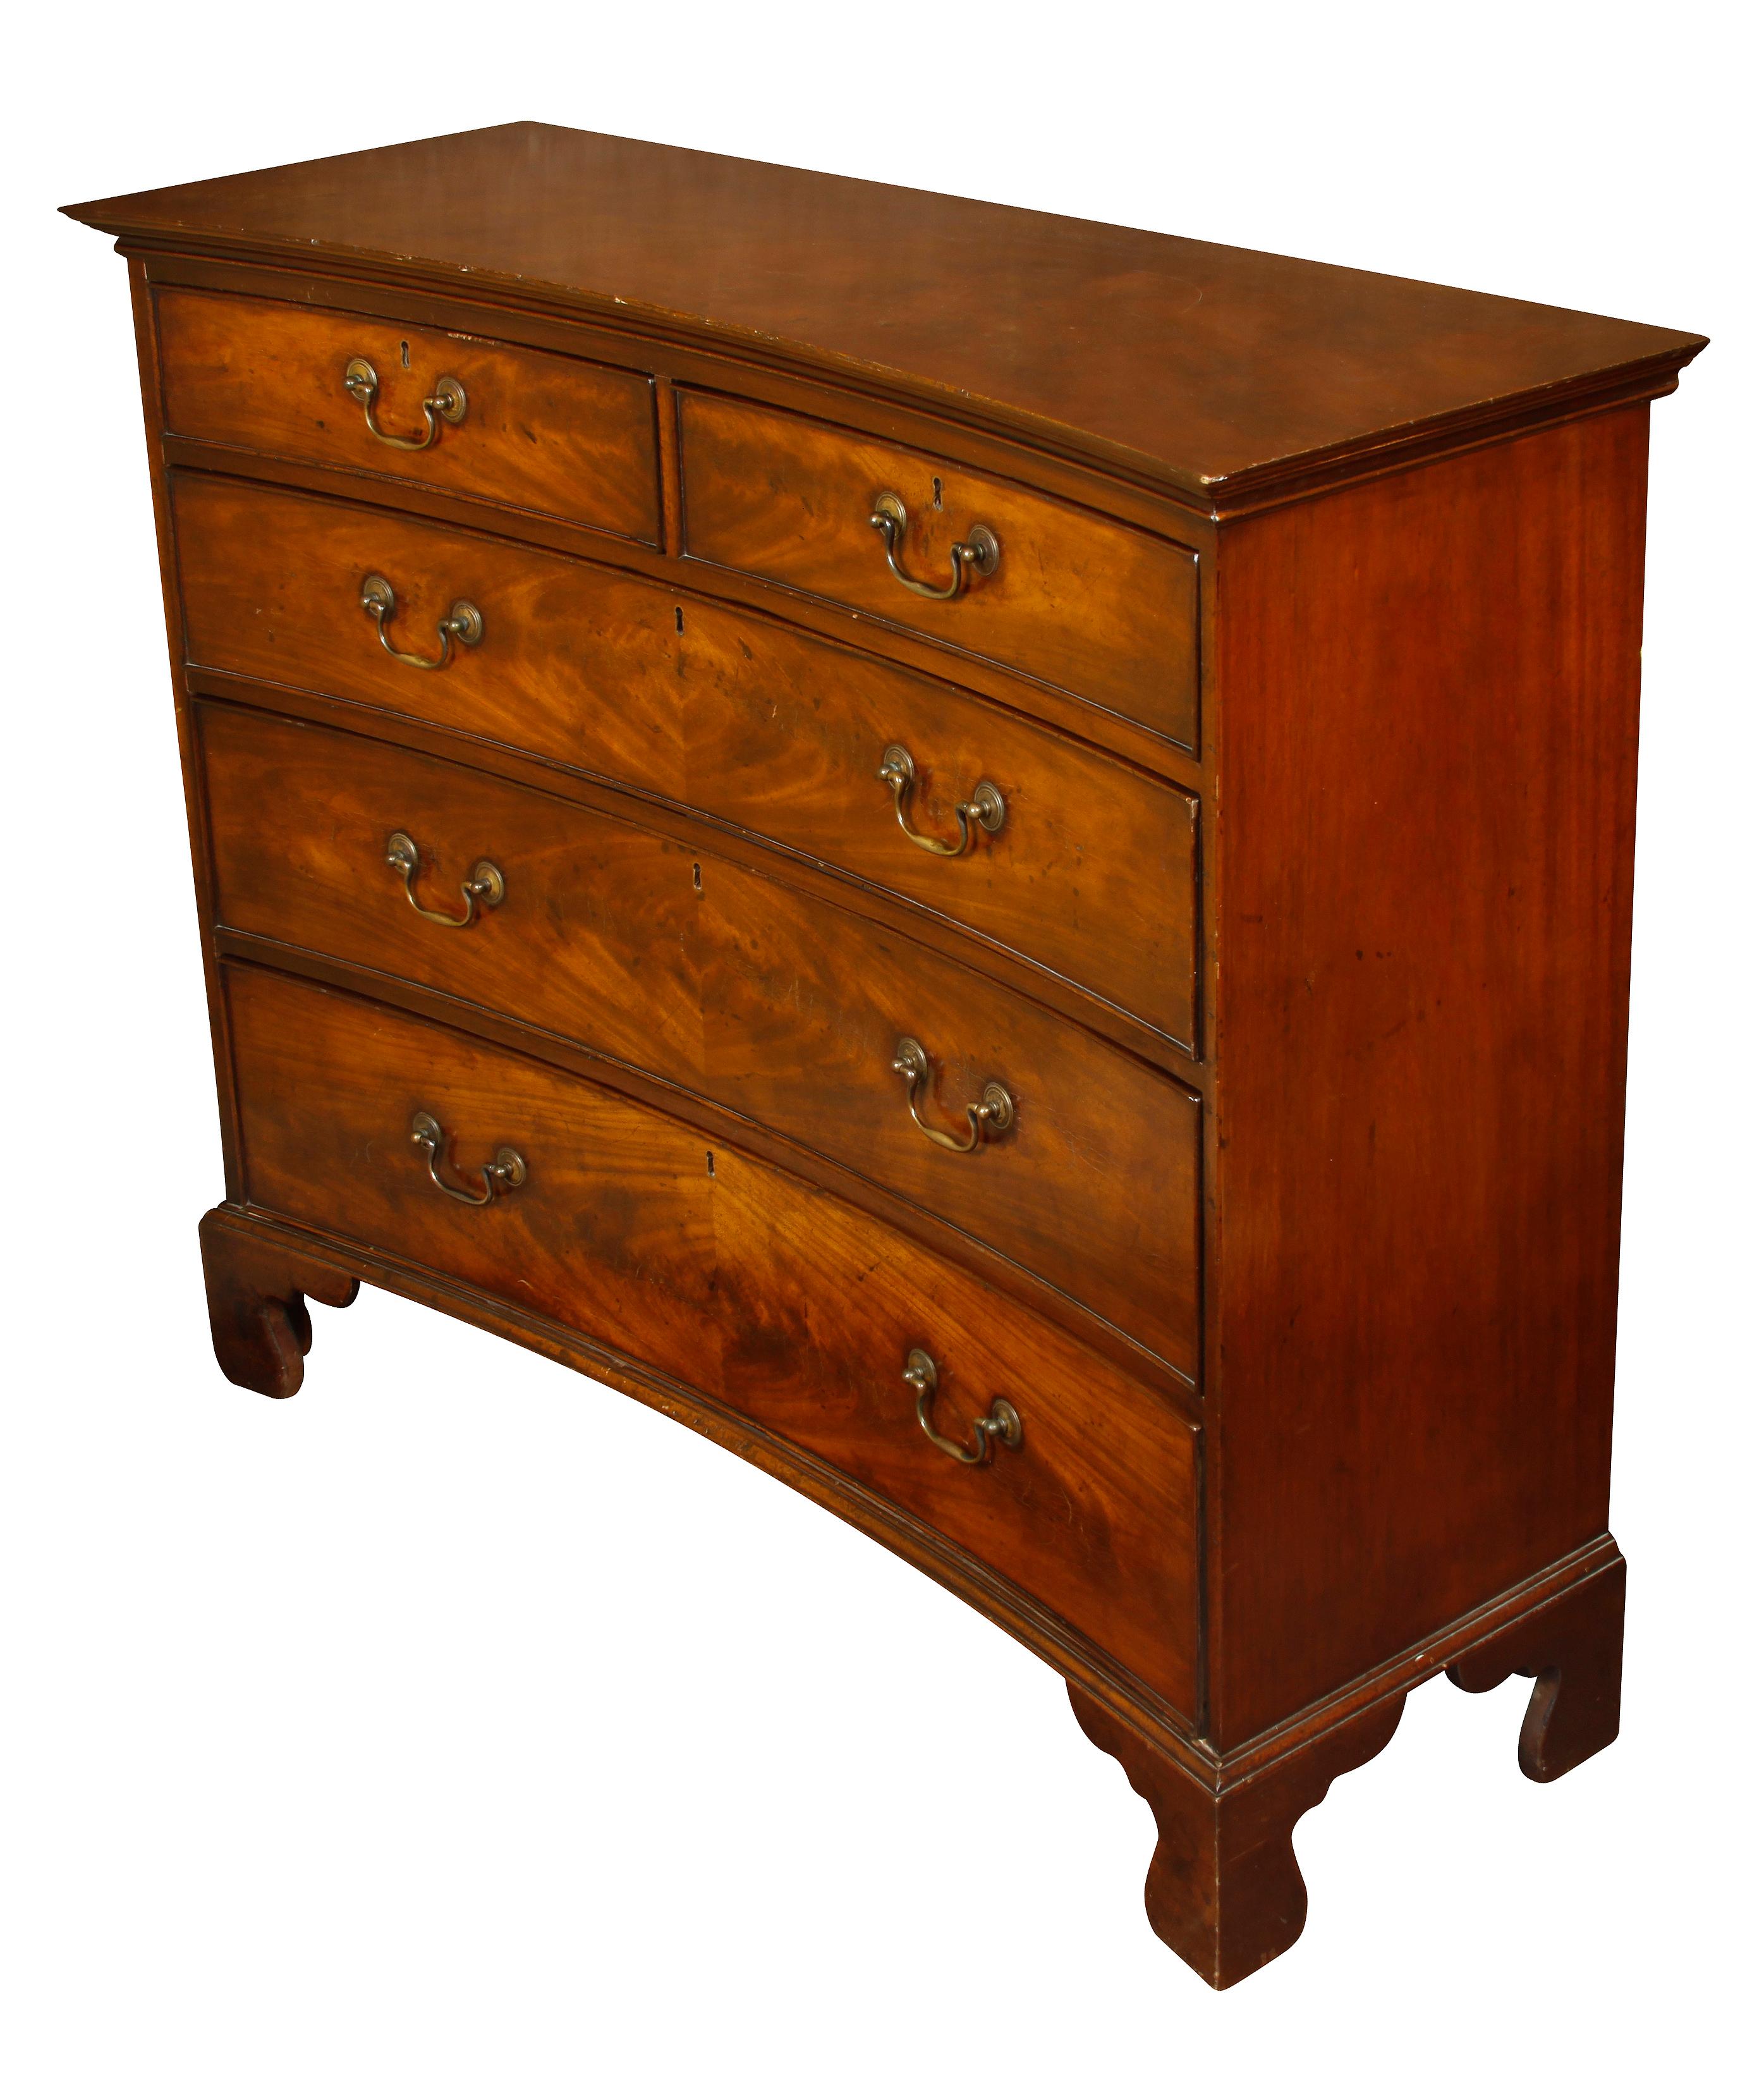 Bowed English mahogany chest of drawers. Two drawers at top and three below, all with curved bail drawer pulls.